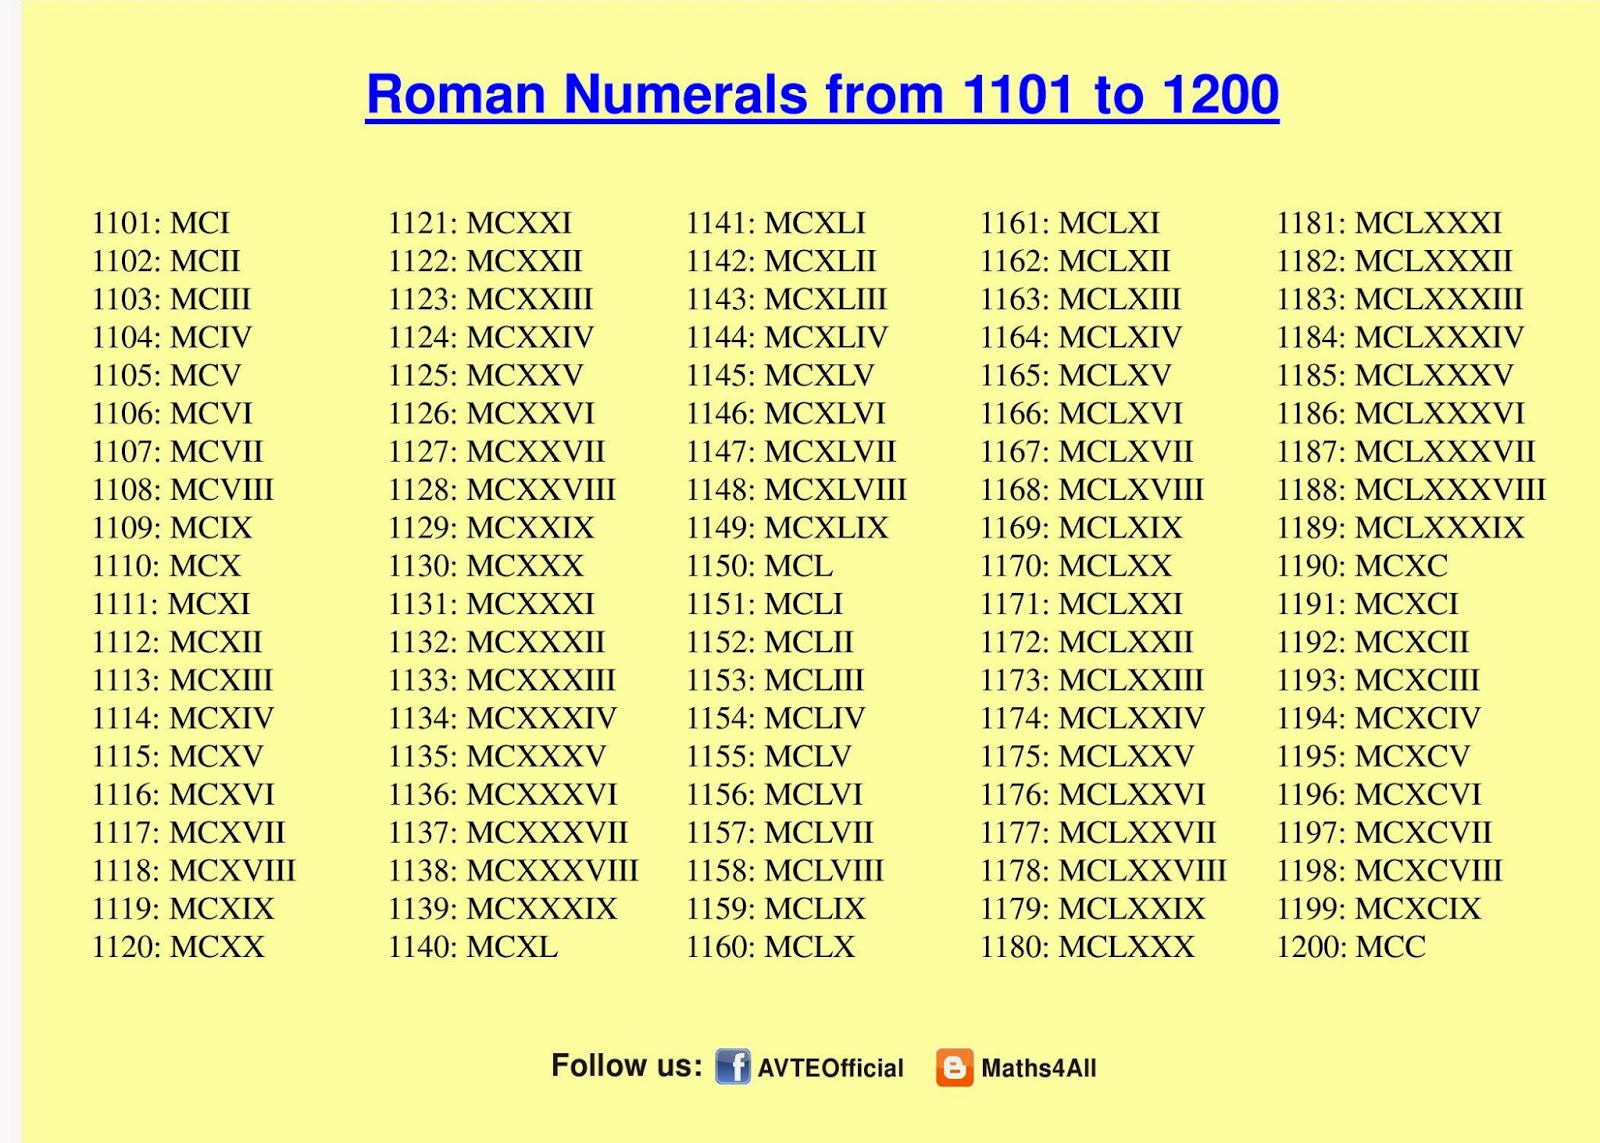 Maths4all: ROMAN NUMERALS 1101 TO 1200